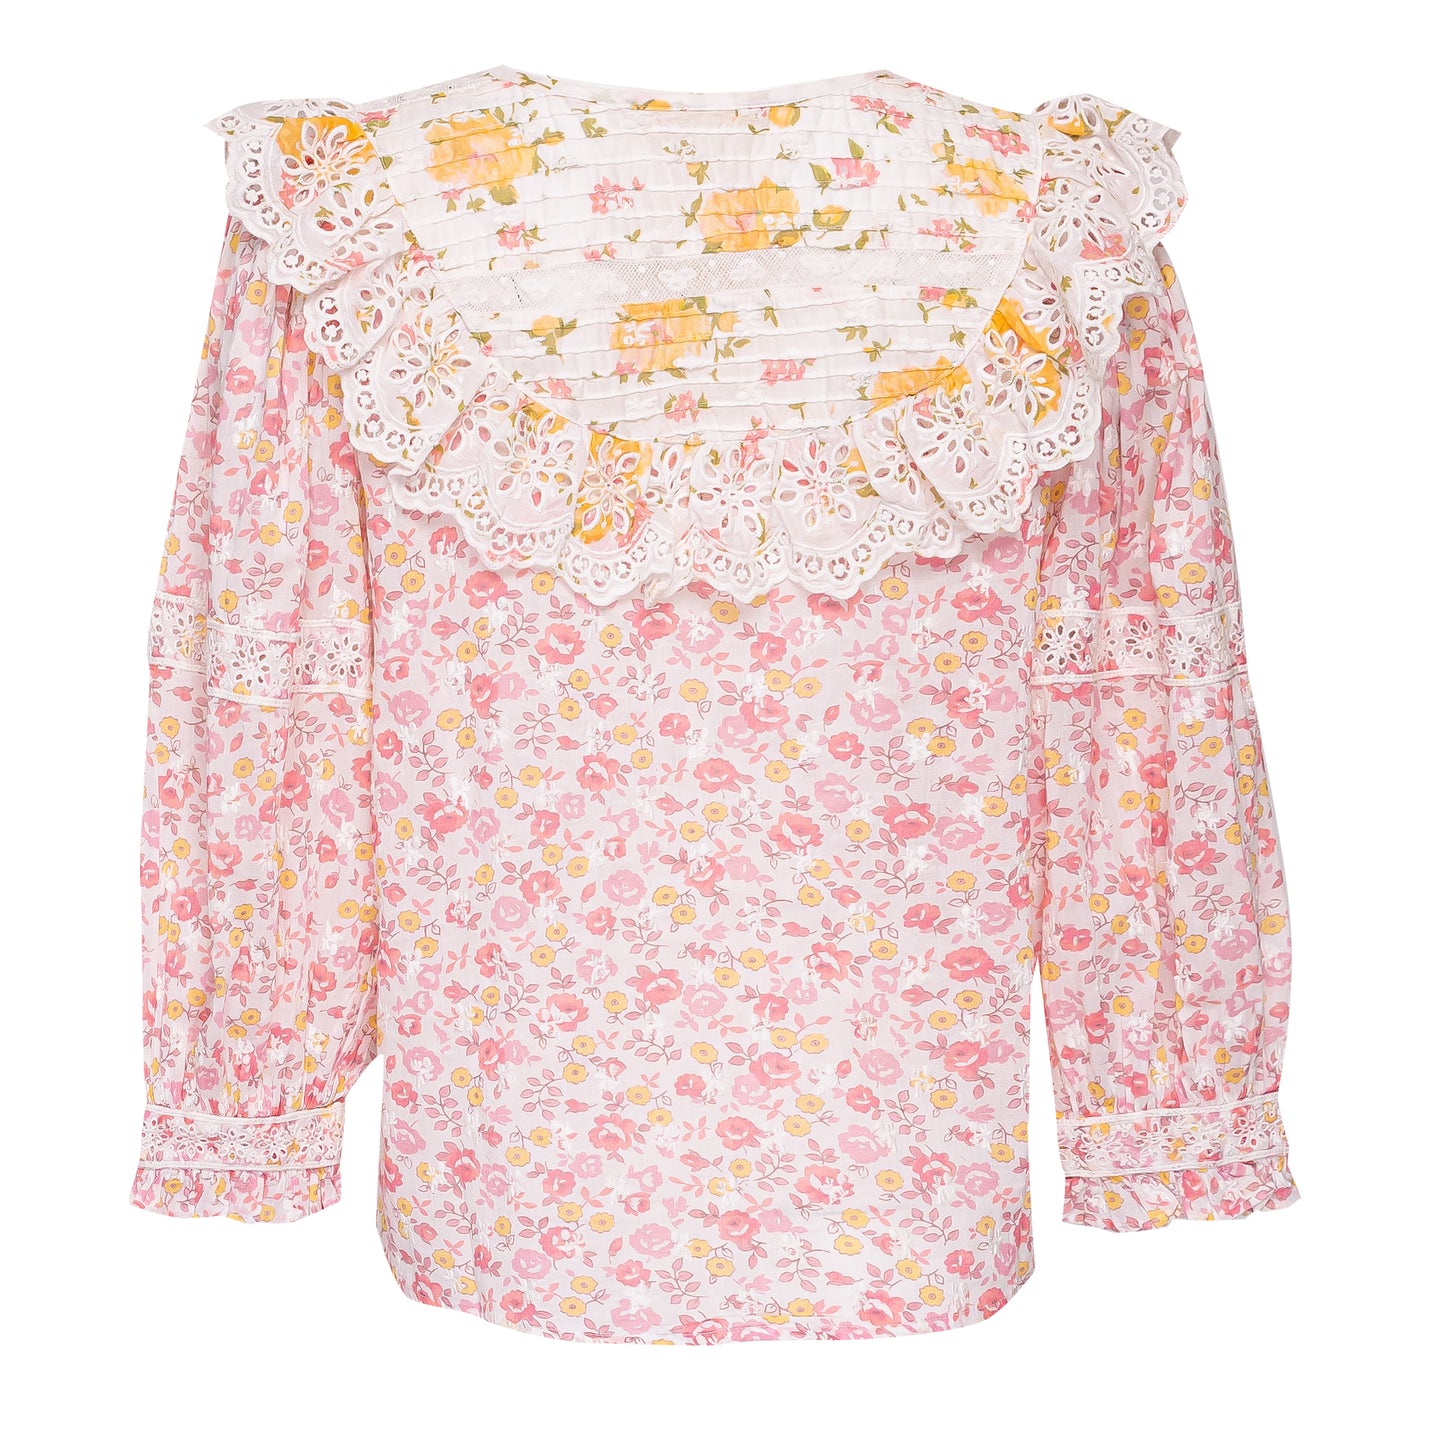 Load image into Gallery viewer, Womens Top with Sunny Garden Floral Prints
